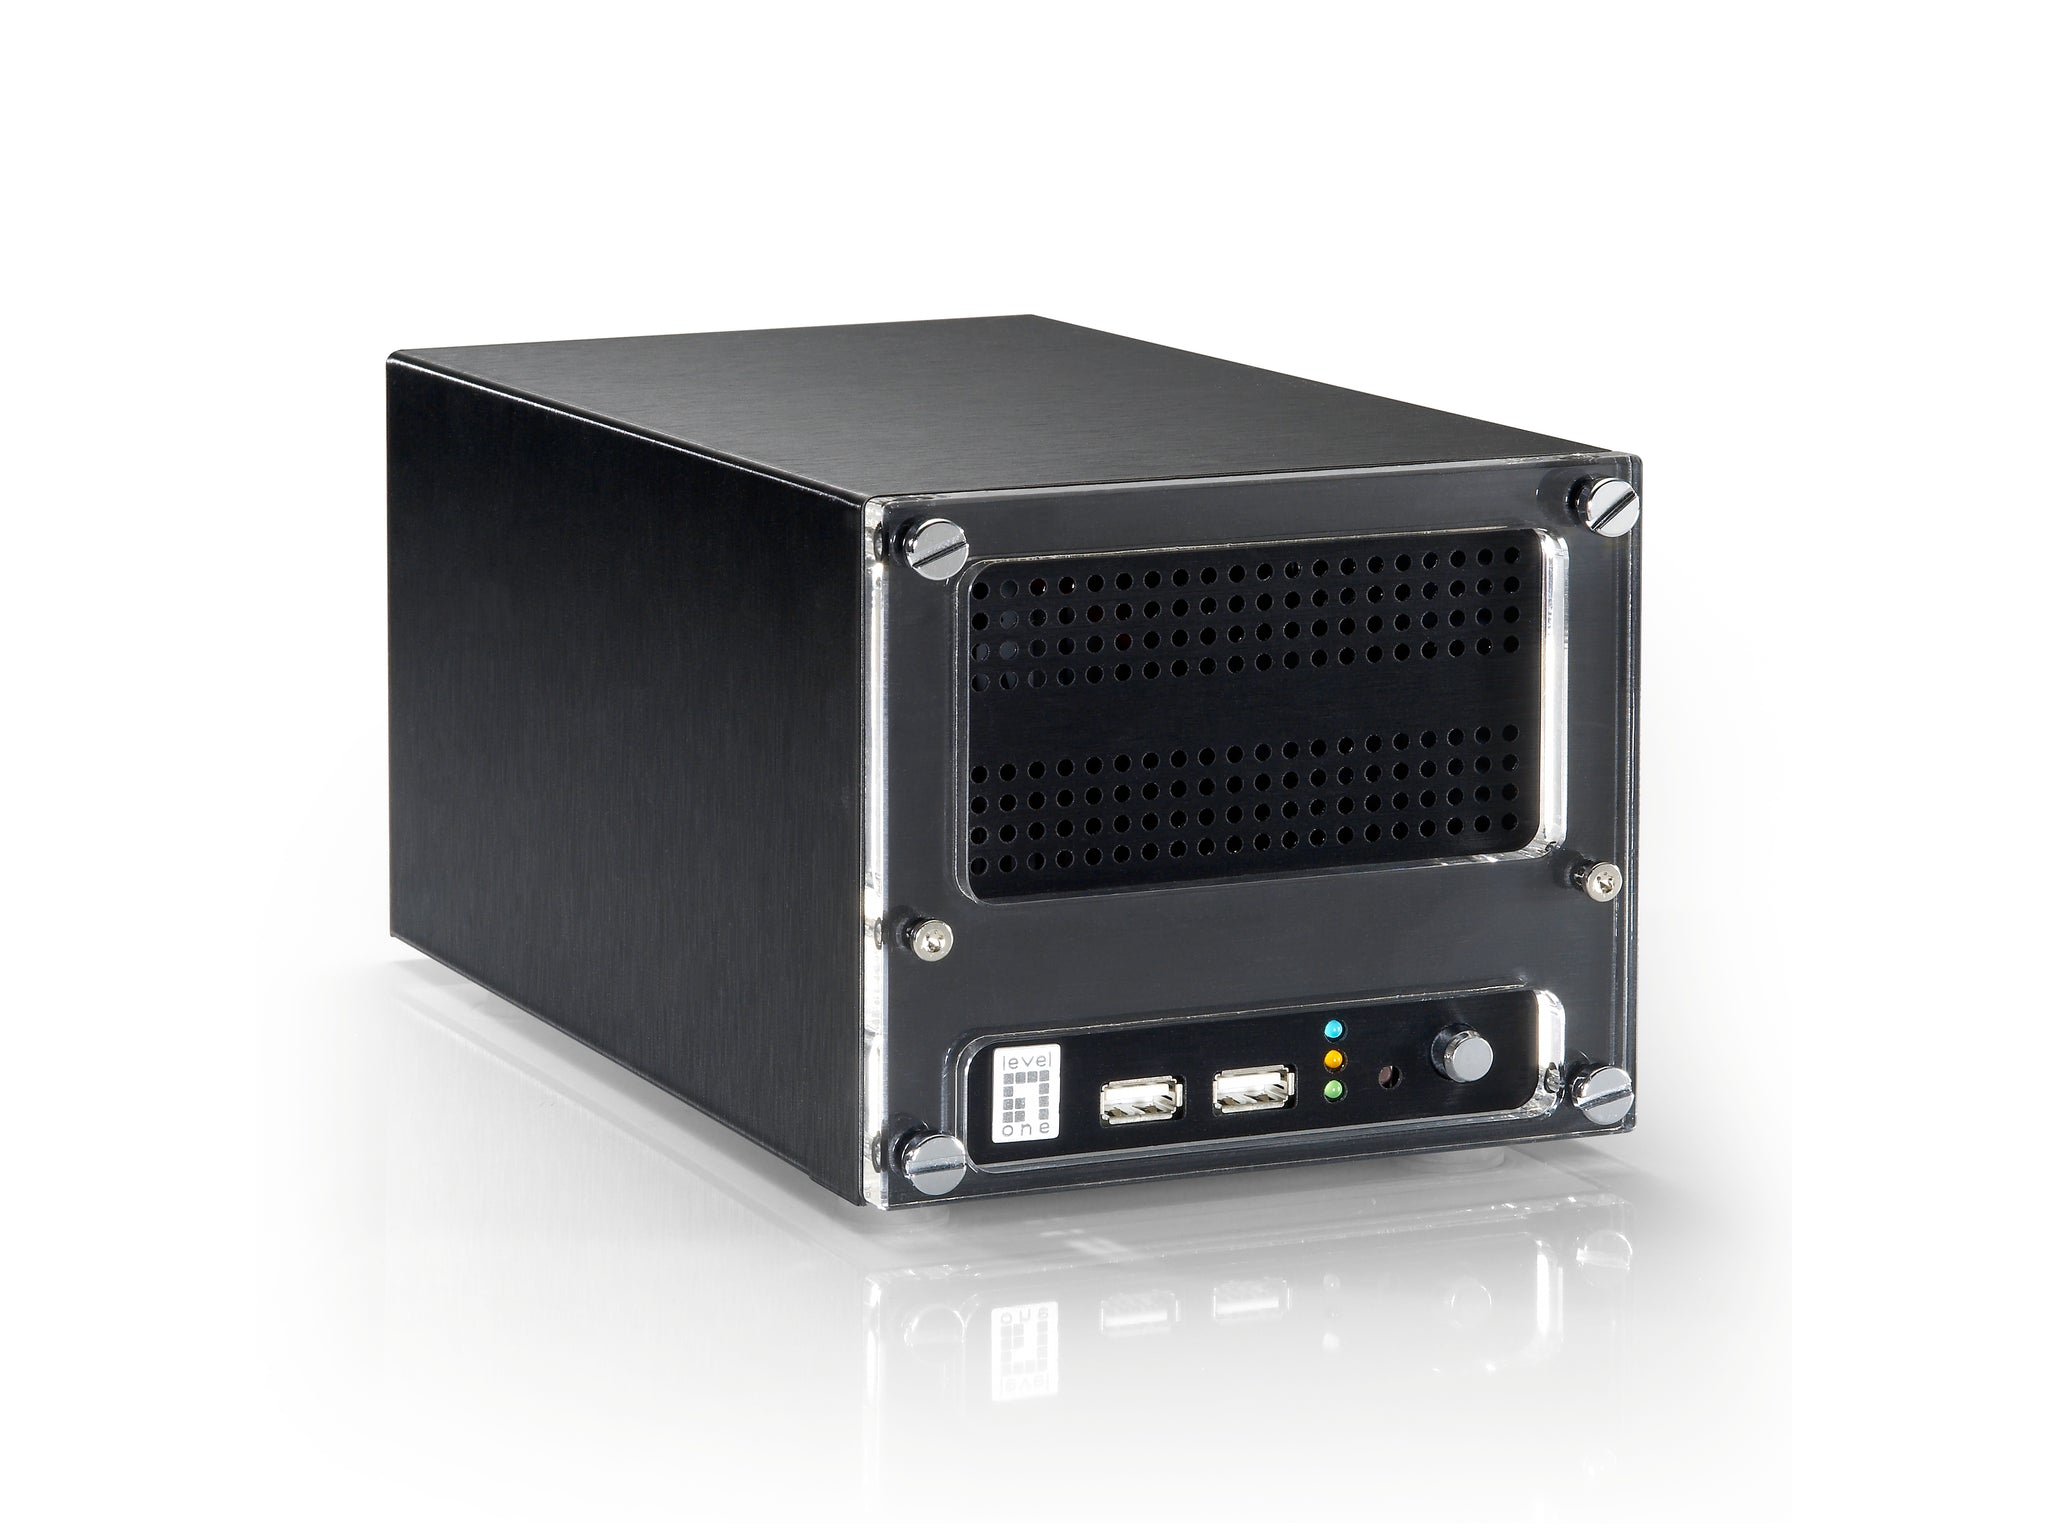 NVR-1204 4-Channel Network Video Recorder